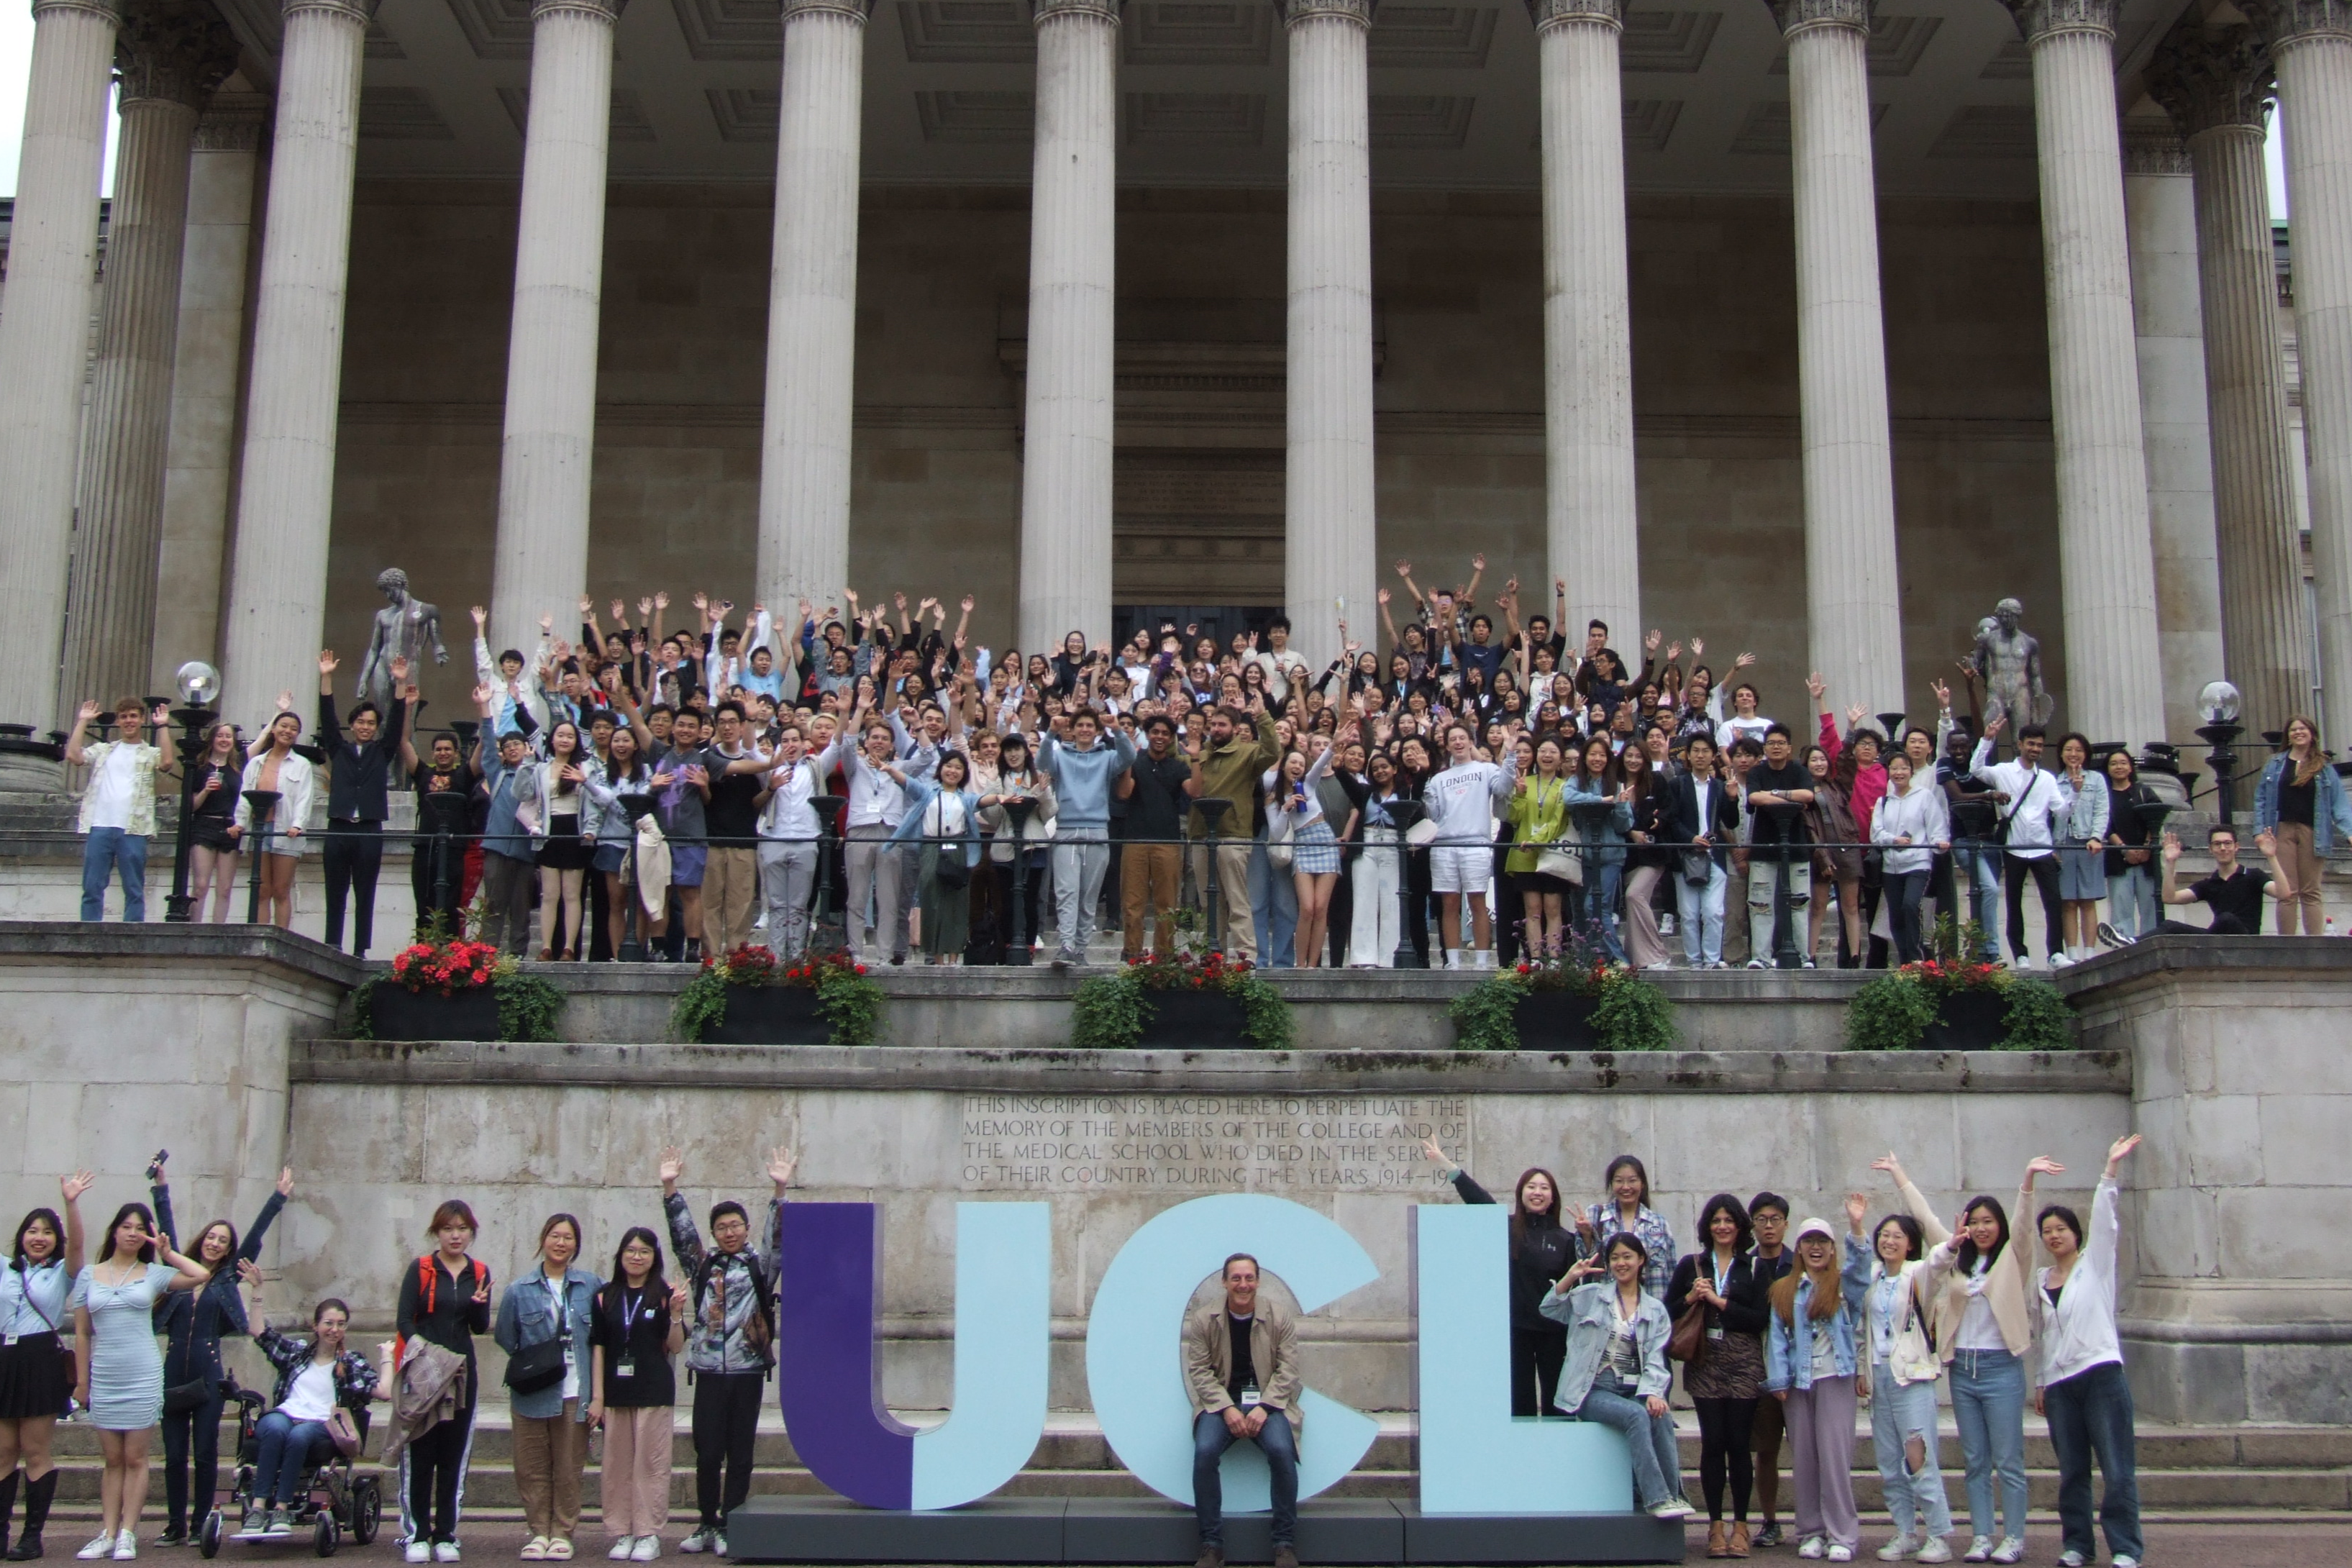 ӰԺ Summer School 2023 on the steps of the Portico Building